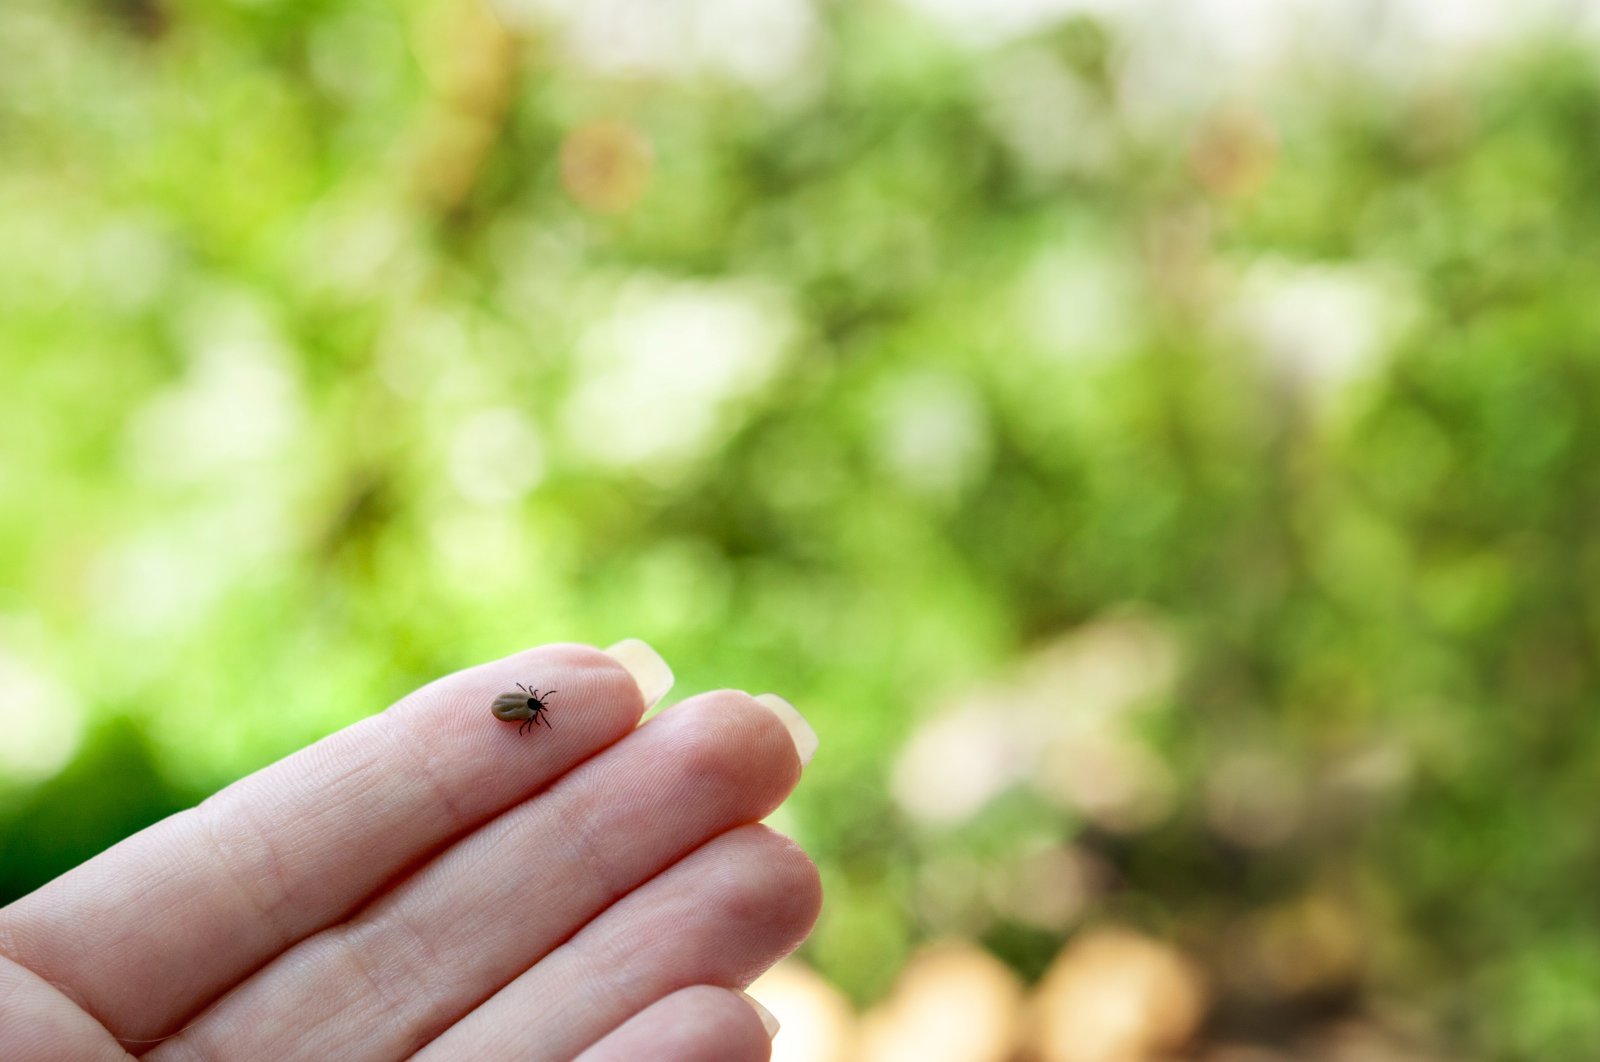 If a small black spot remains after you pull out the tick, it's no cause for alarm: It's just the stinger, which is not infectious. (Shutterstock Photo)